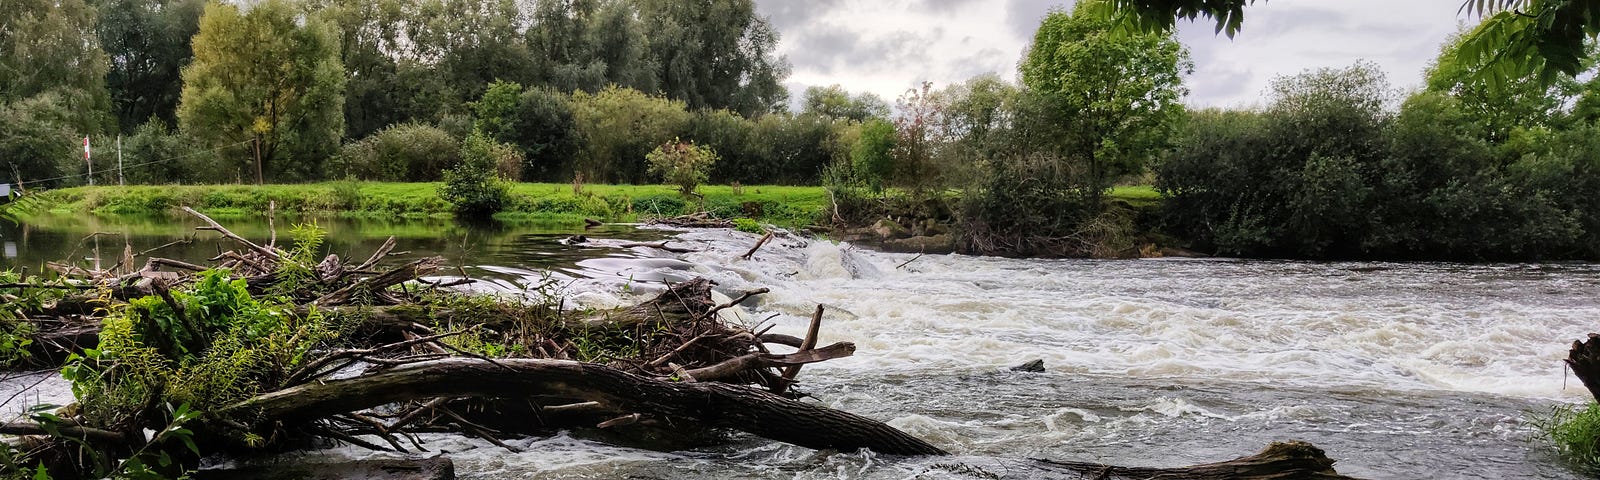 Image of a flooded stream with branches